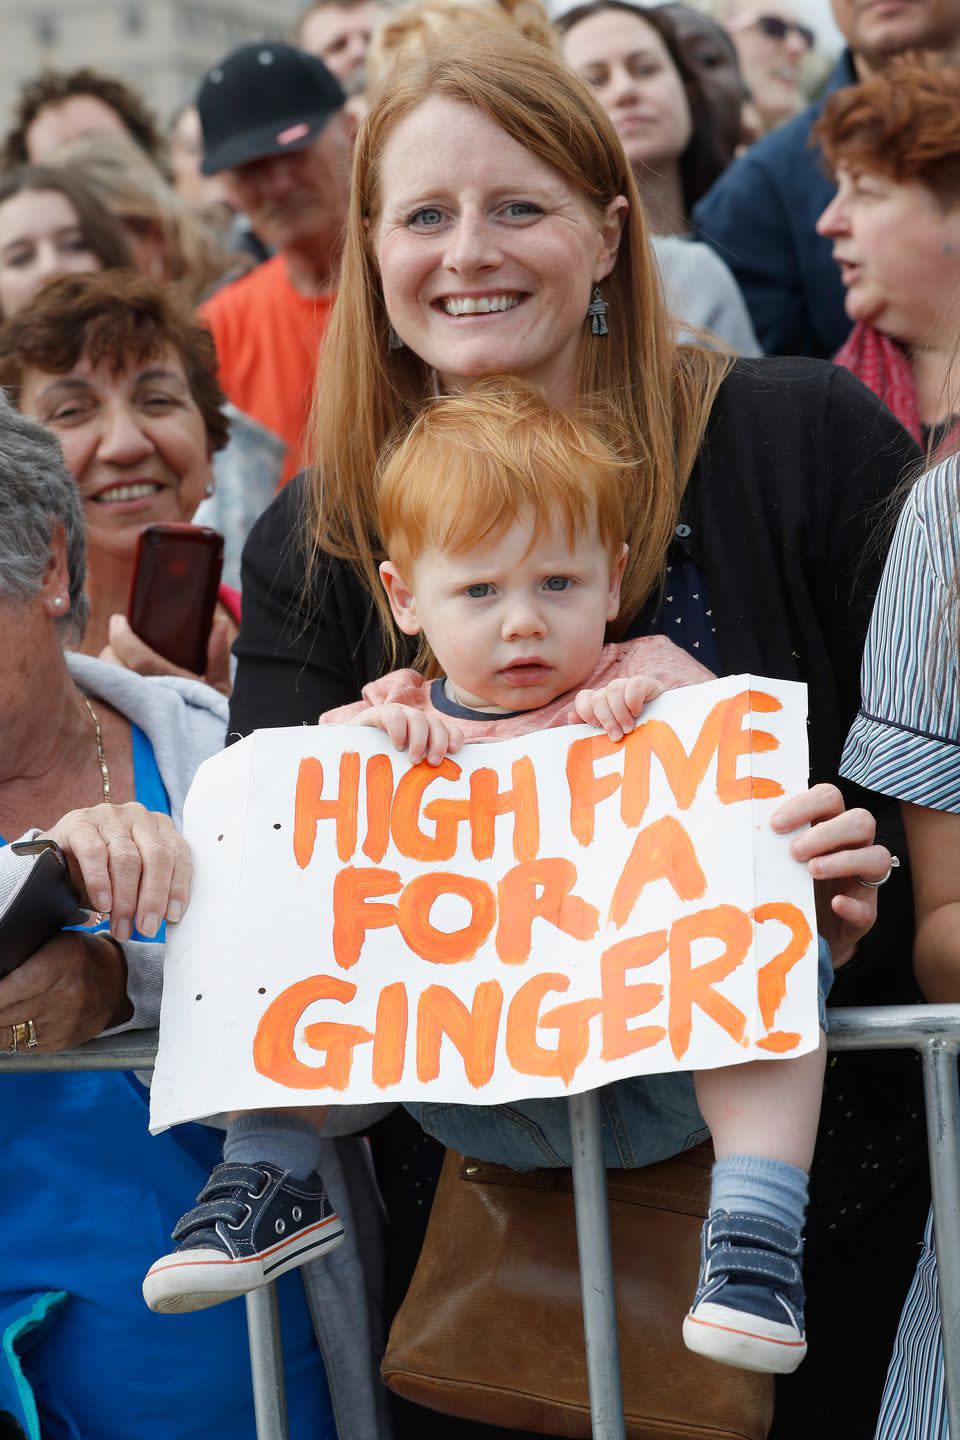 <p>We can only hope this red-headed youngster got his wish for a high five.</p>